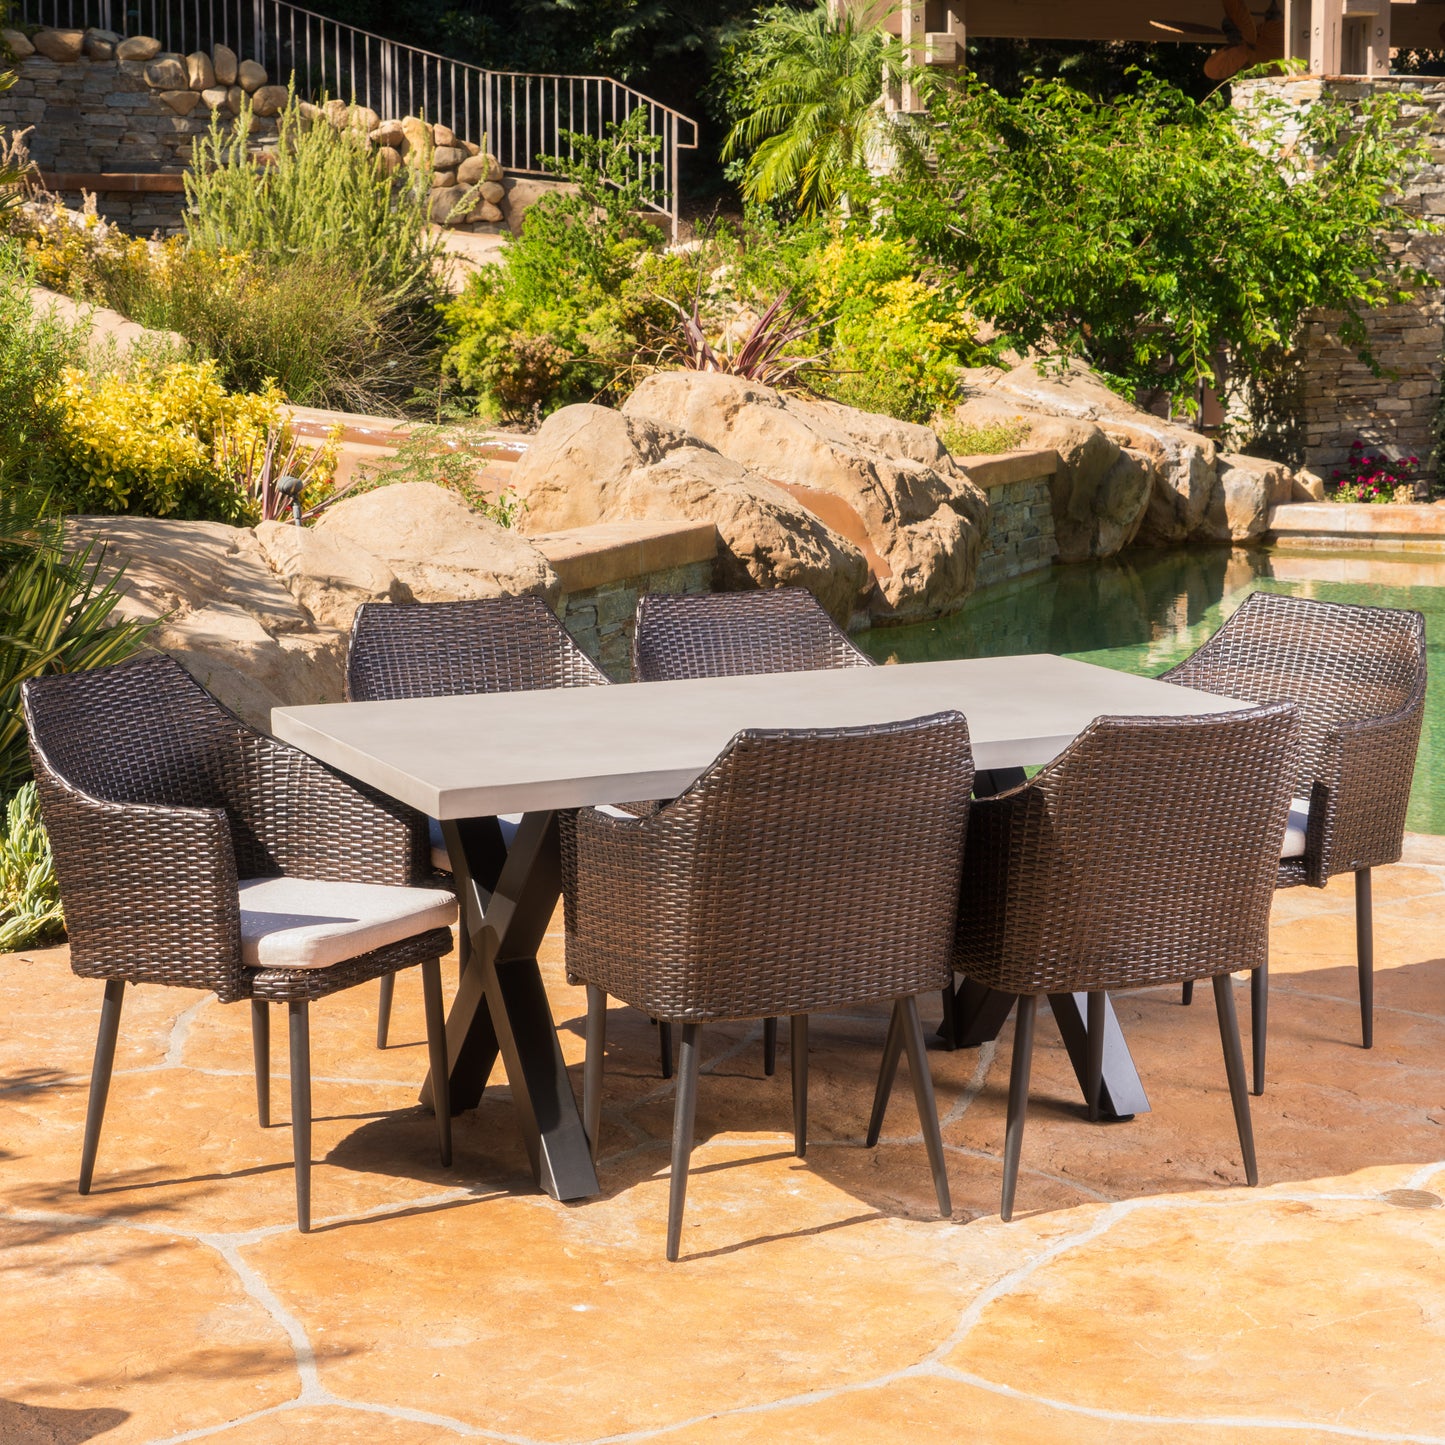 Maccie Outdoor 6 Seater Dining Set